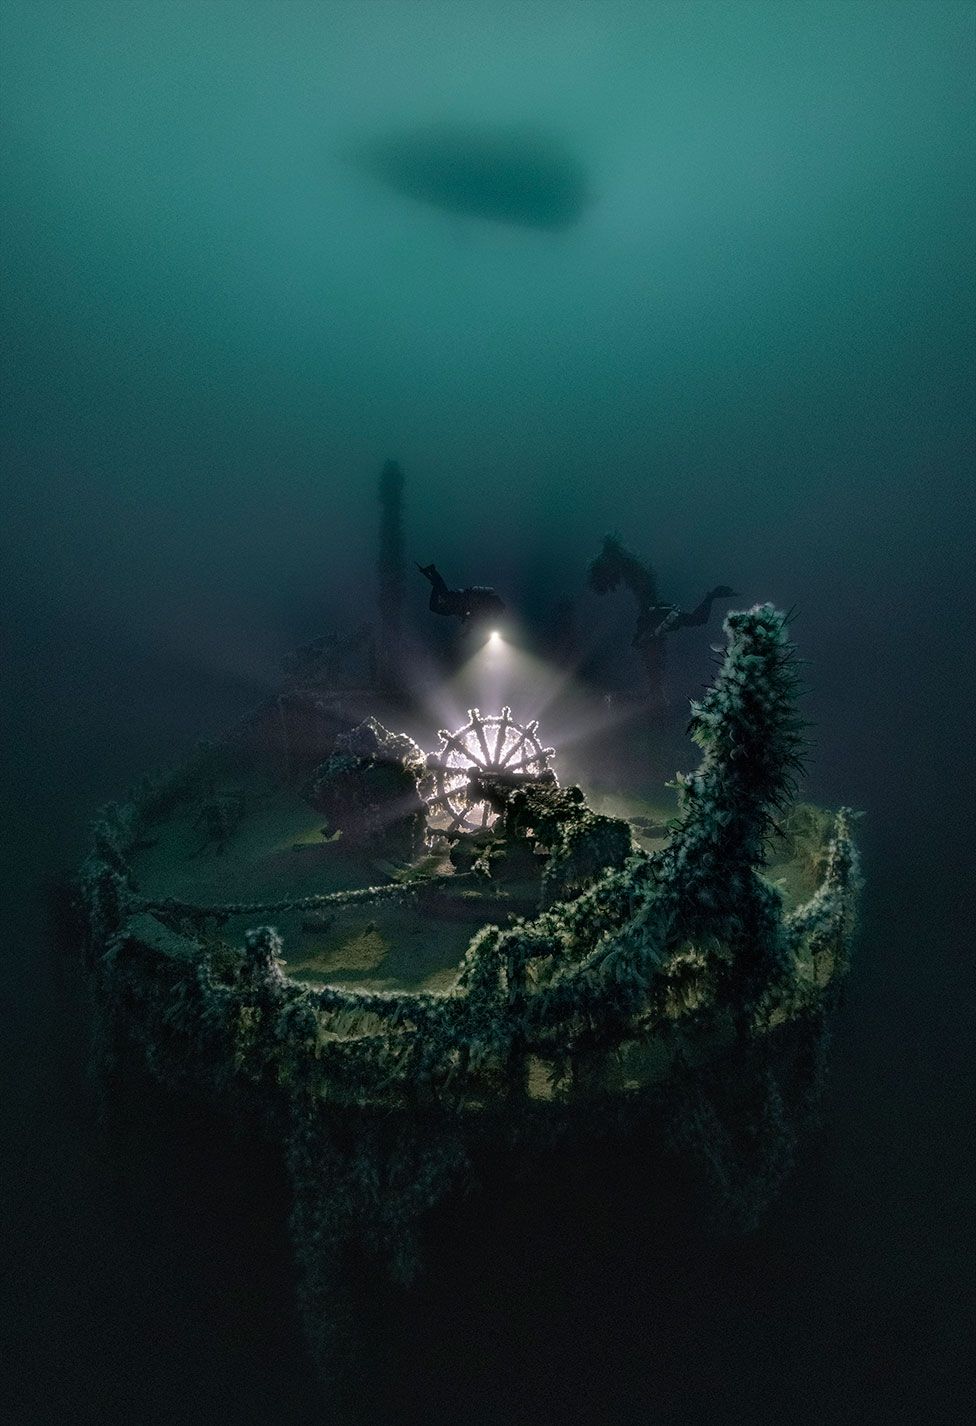 The wreck of Tyrifjord in the Gulen dive resort area of Norway